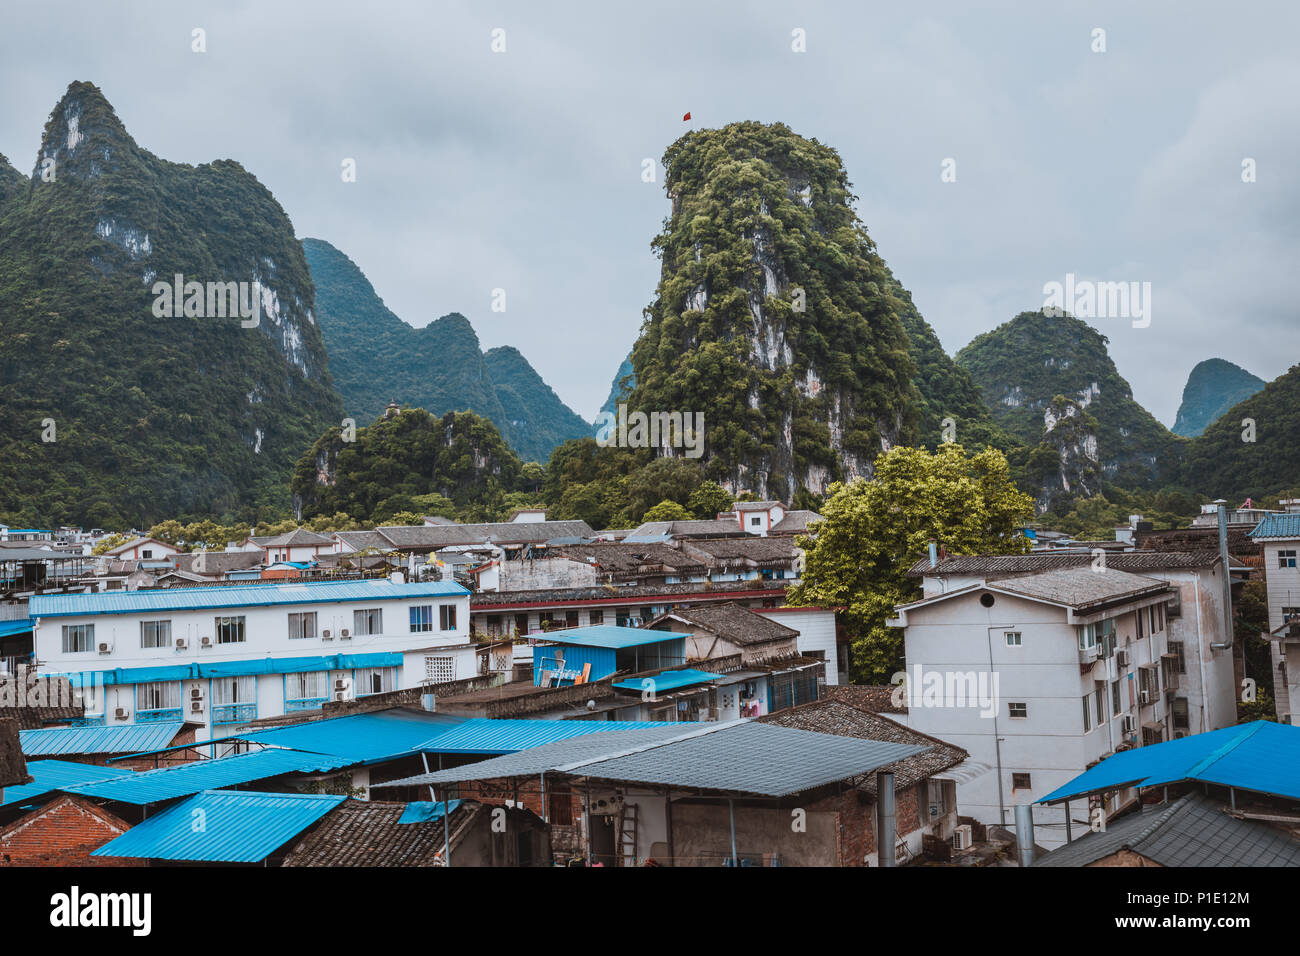 Scenic landscape at Yangshuo County of Guilin, China. Stock Photo